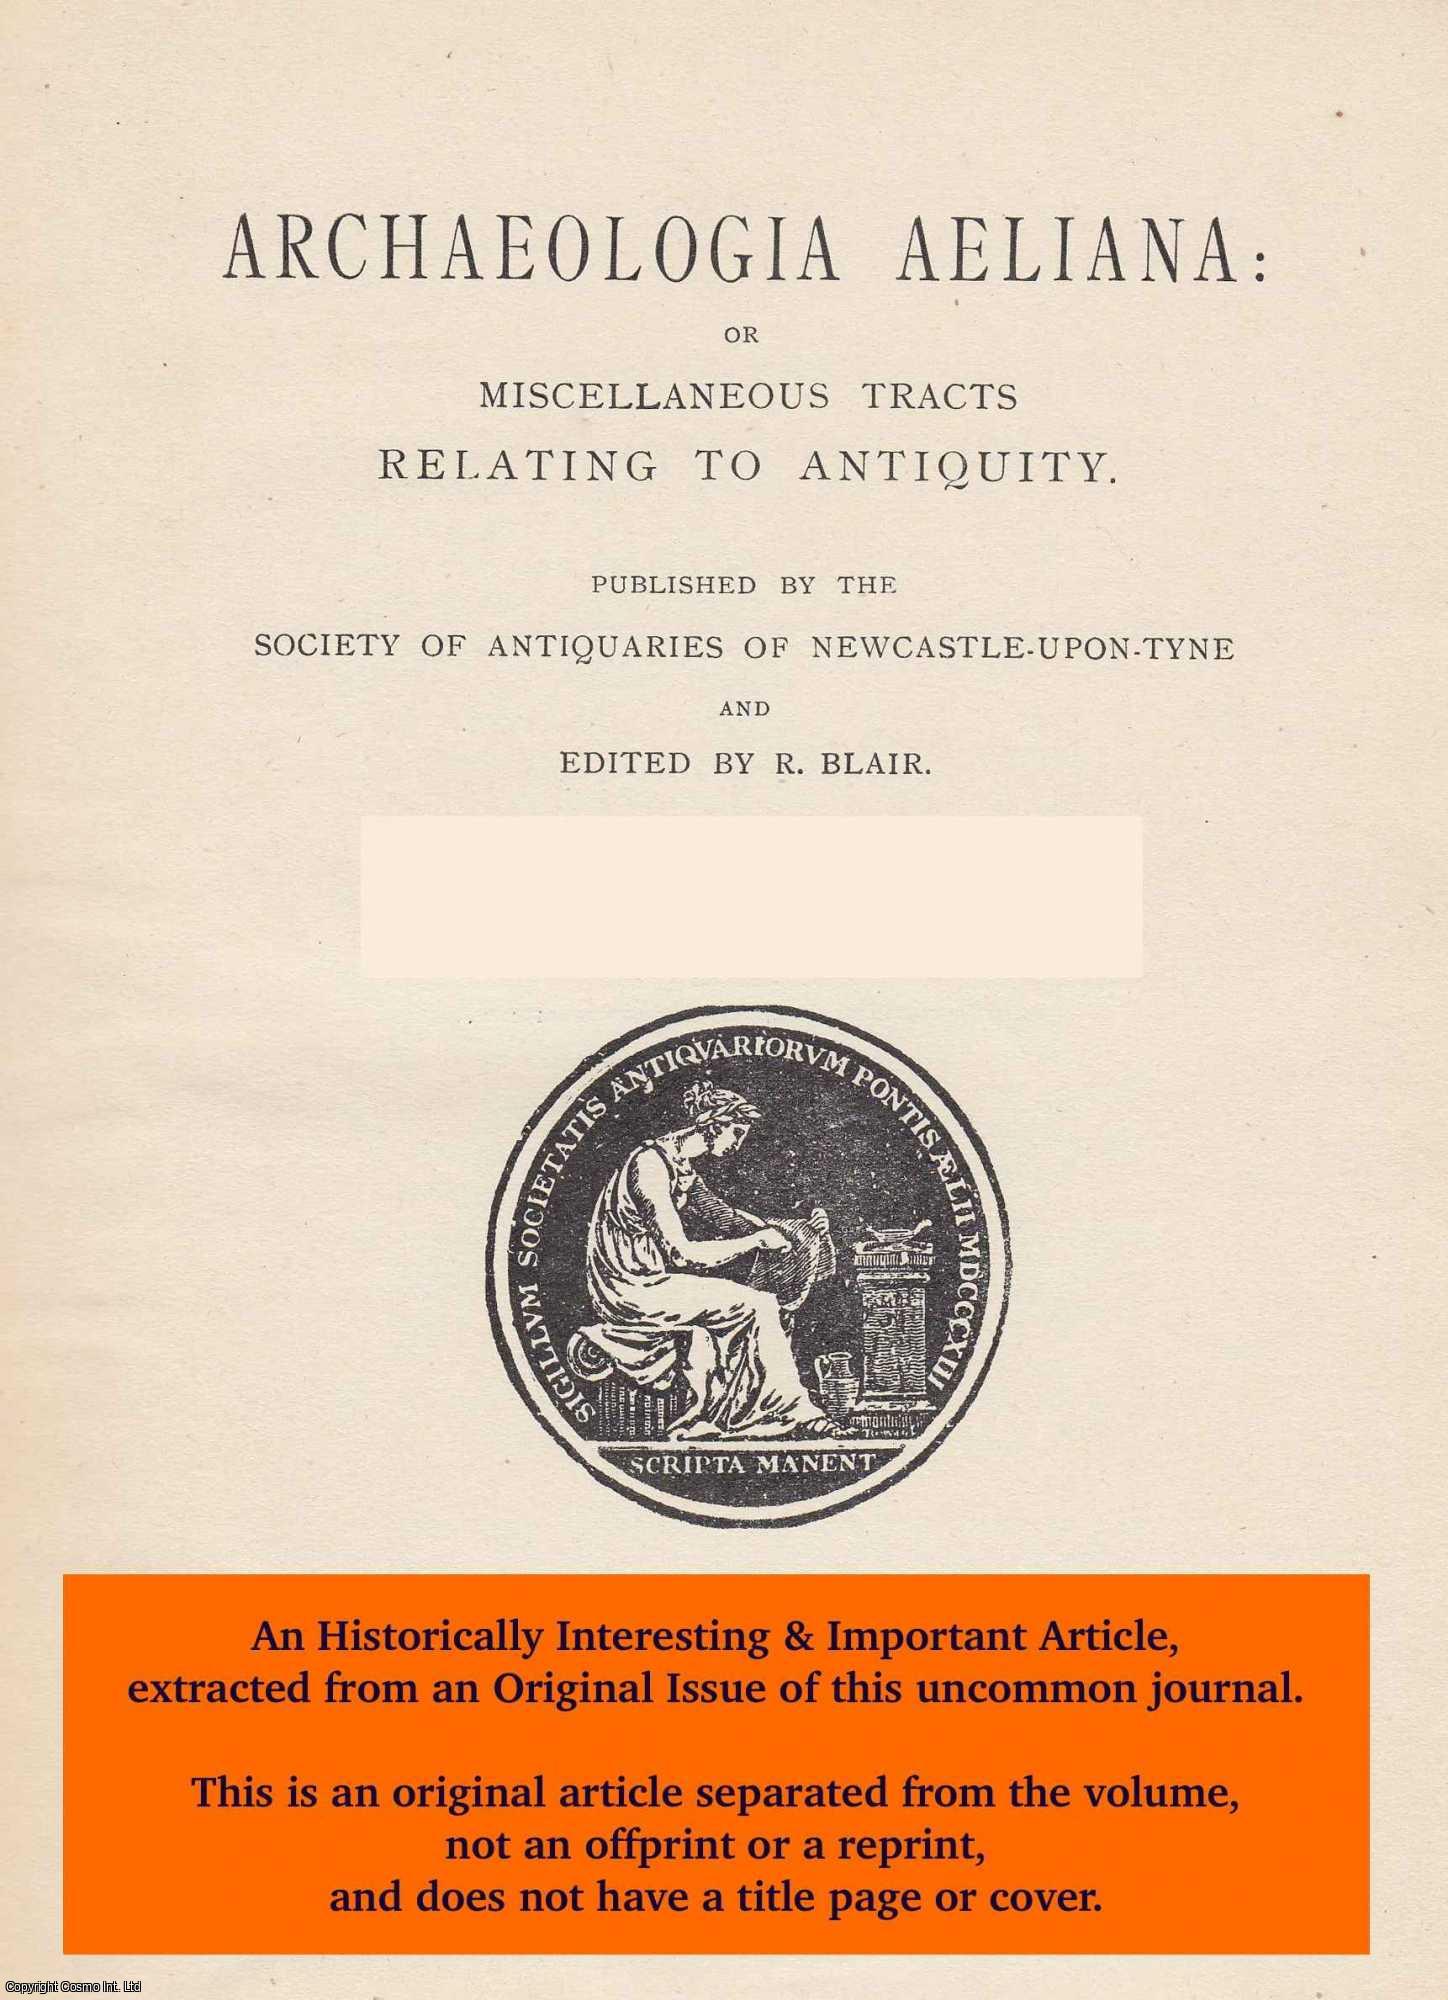 W. Douglas Simpson, W. Douglas - Dunstanburgh Castle. An original article from The Archaeologia Aeliana: or Miscellaneous Tracts Relating to Antiquity, 1939.